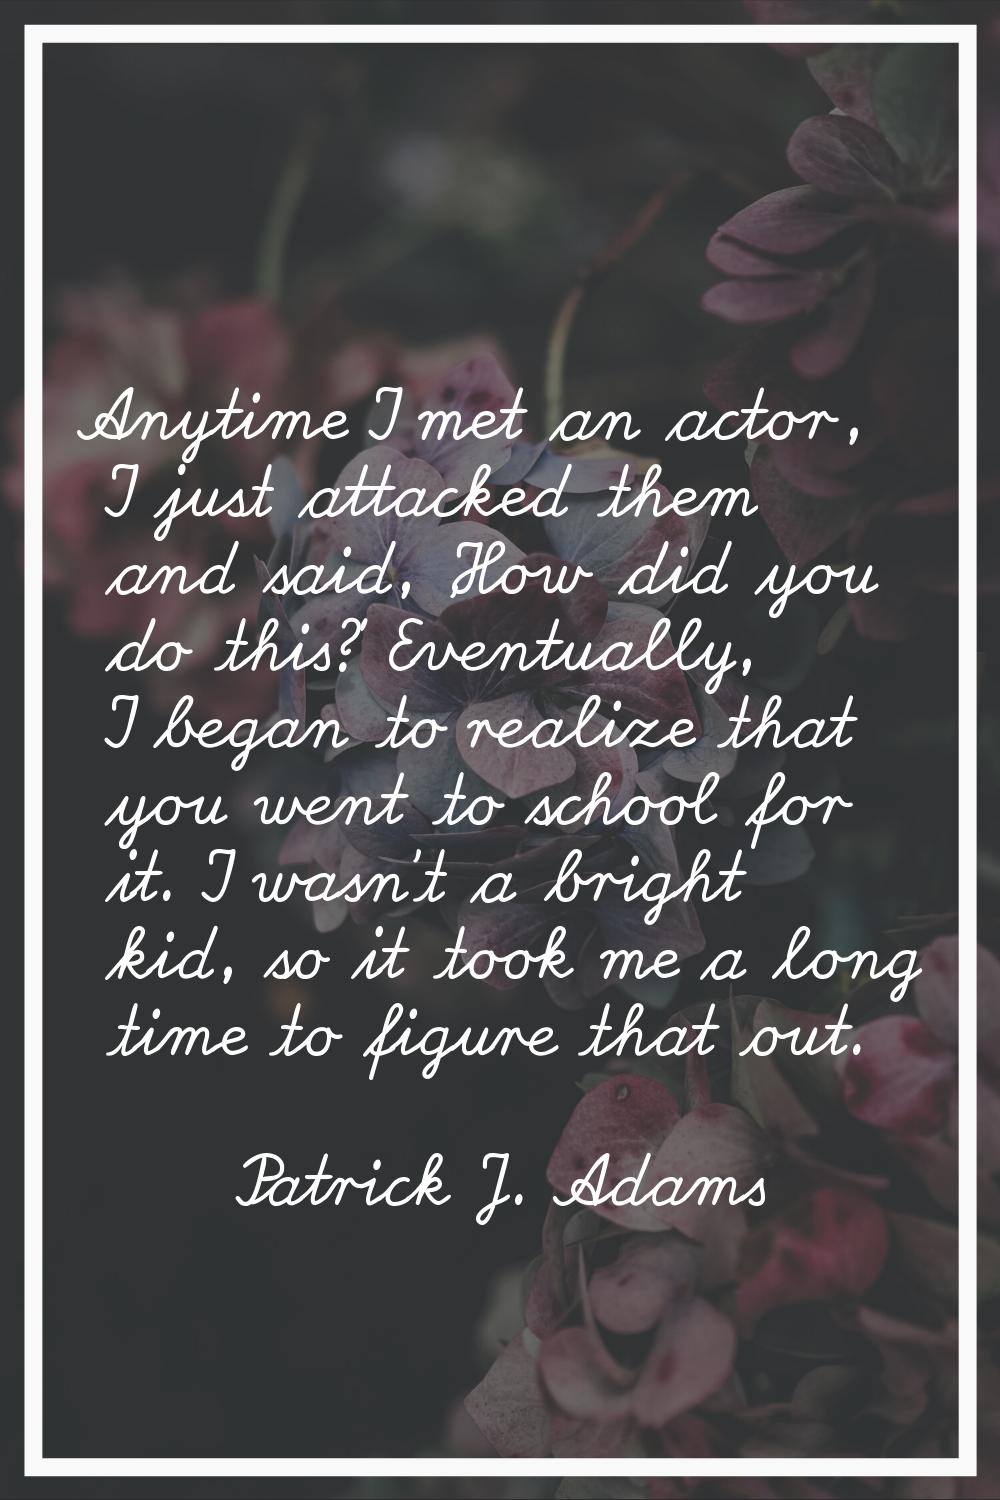 Anytime I met an actor, I just attacked them and said, 'How did you do this?' Eventually, I began t